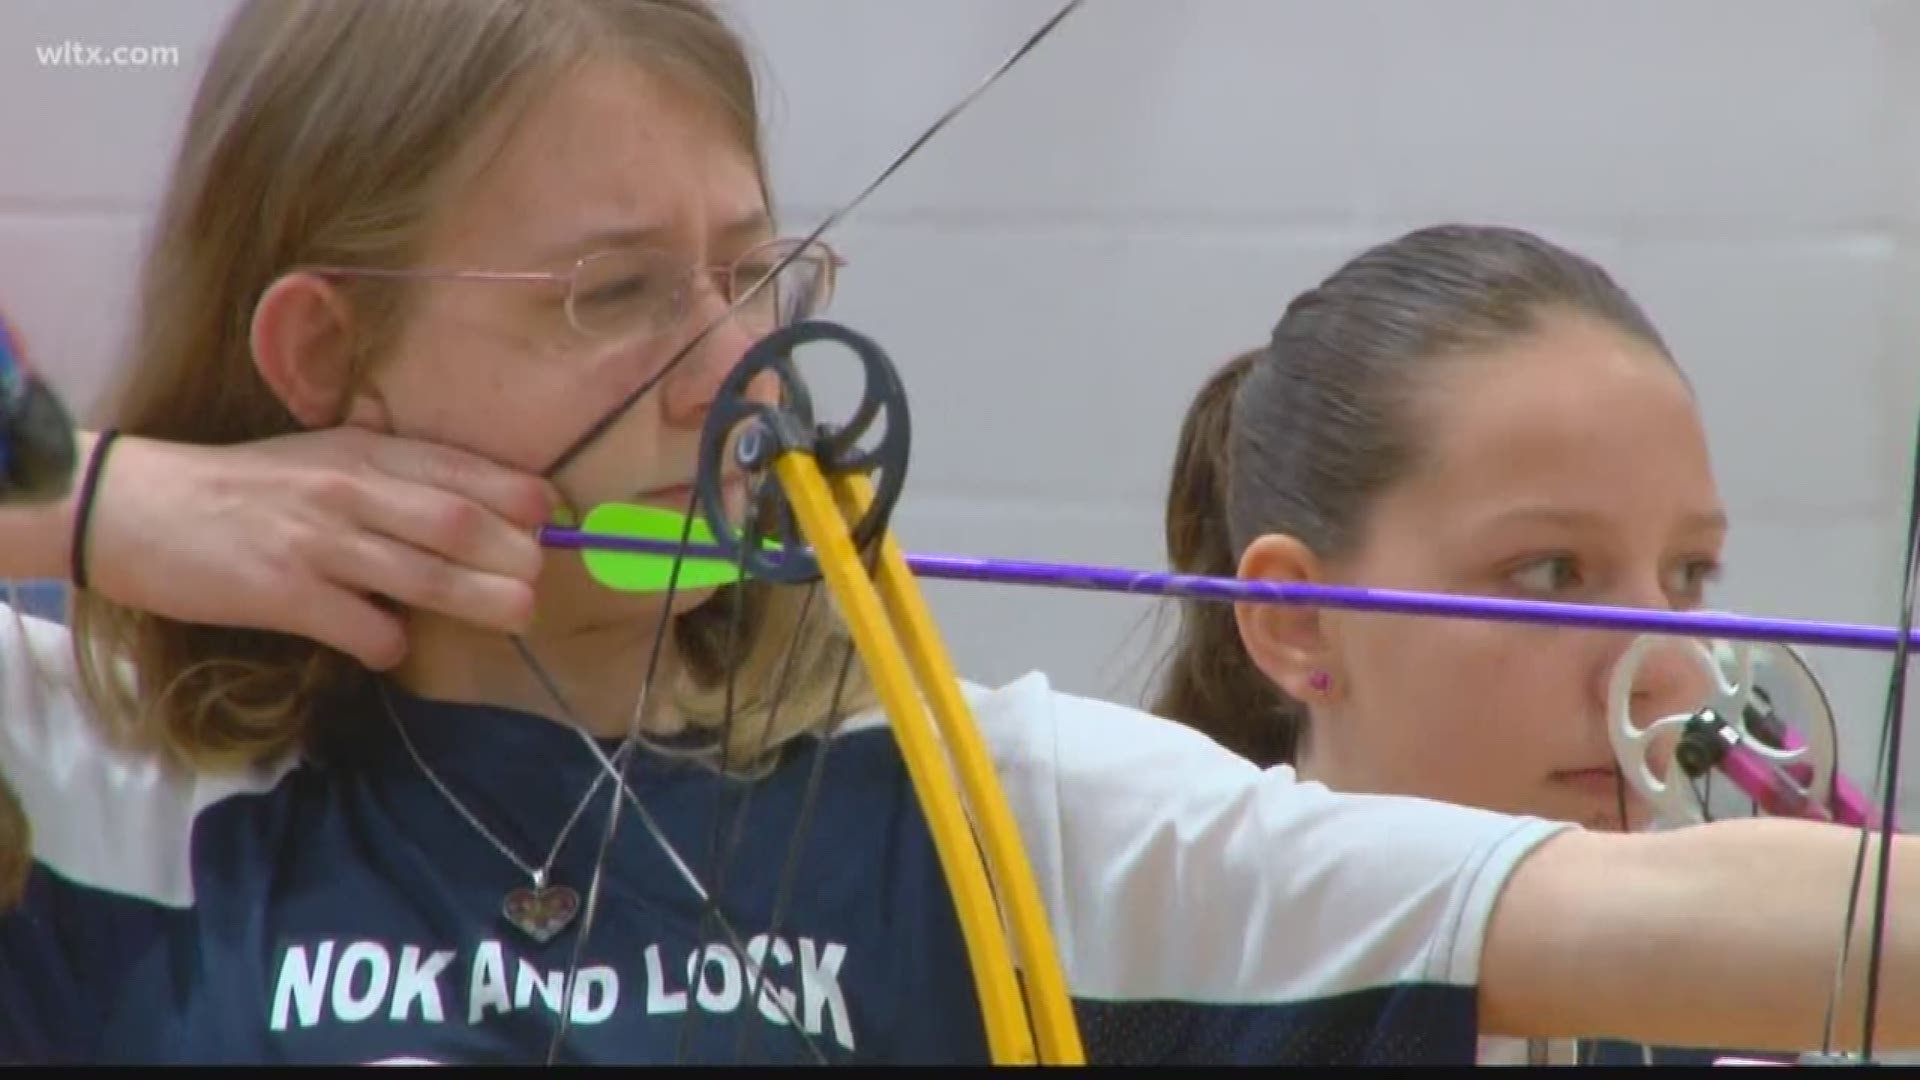 Middle schoolers and high school students are finding another sport that they can have success in that isn't the traditional sport that most people identify with. Archery has kids coming out in large numbers to compete.